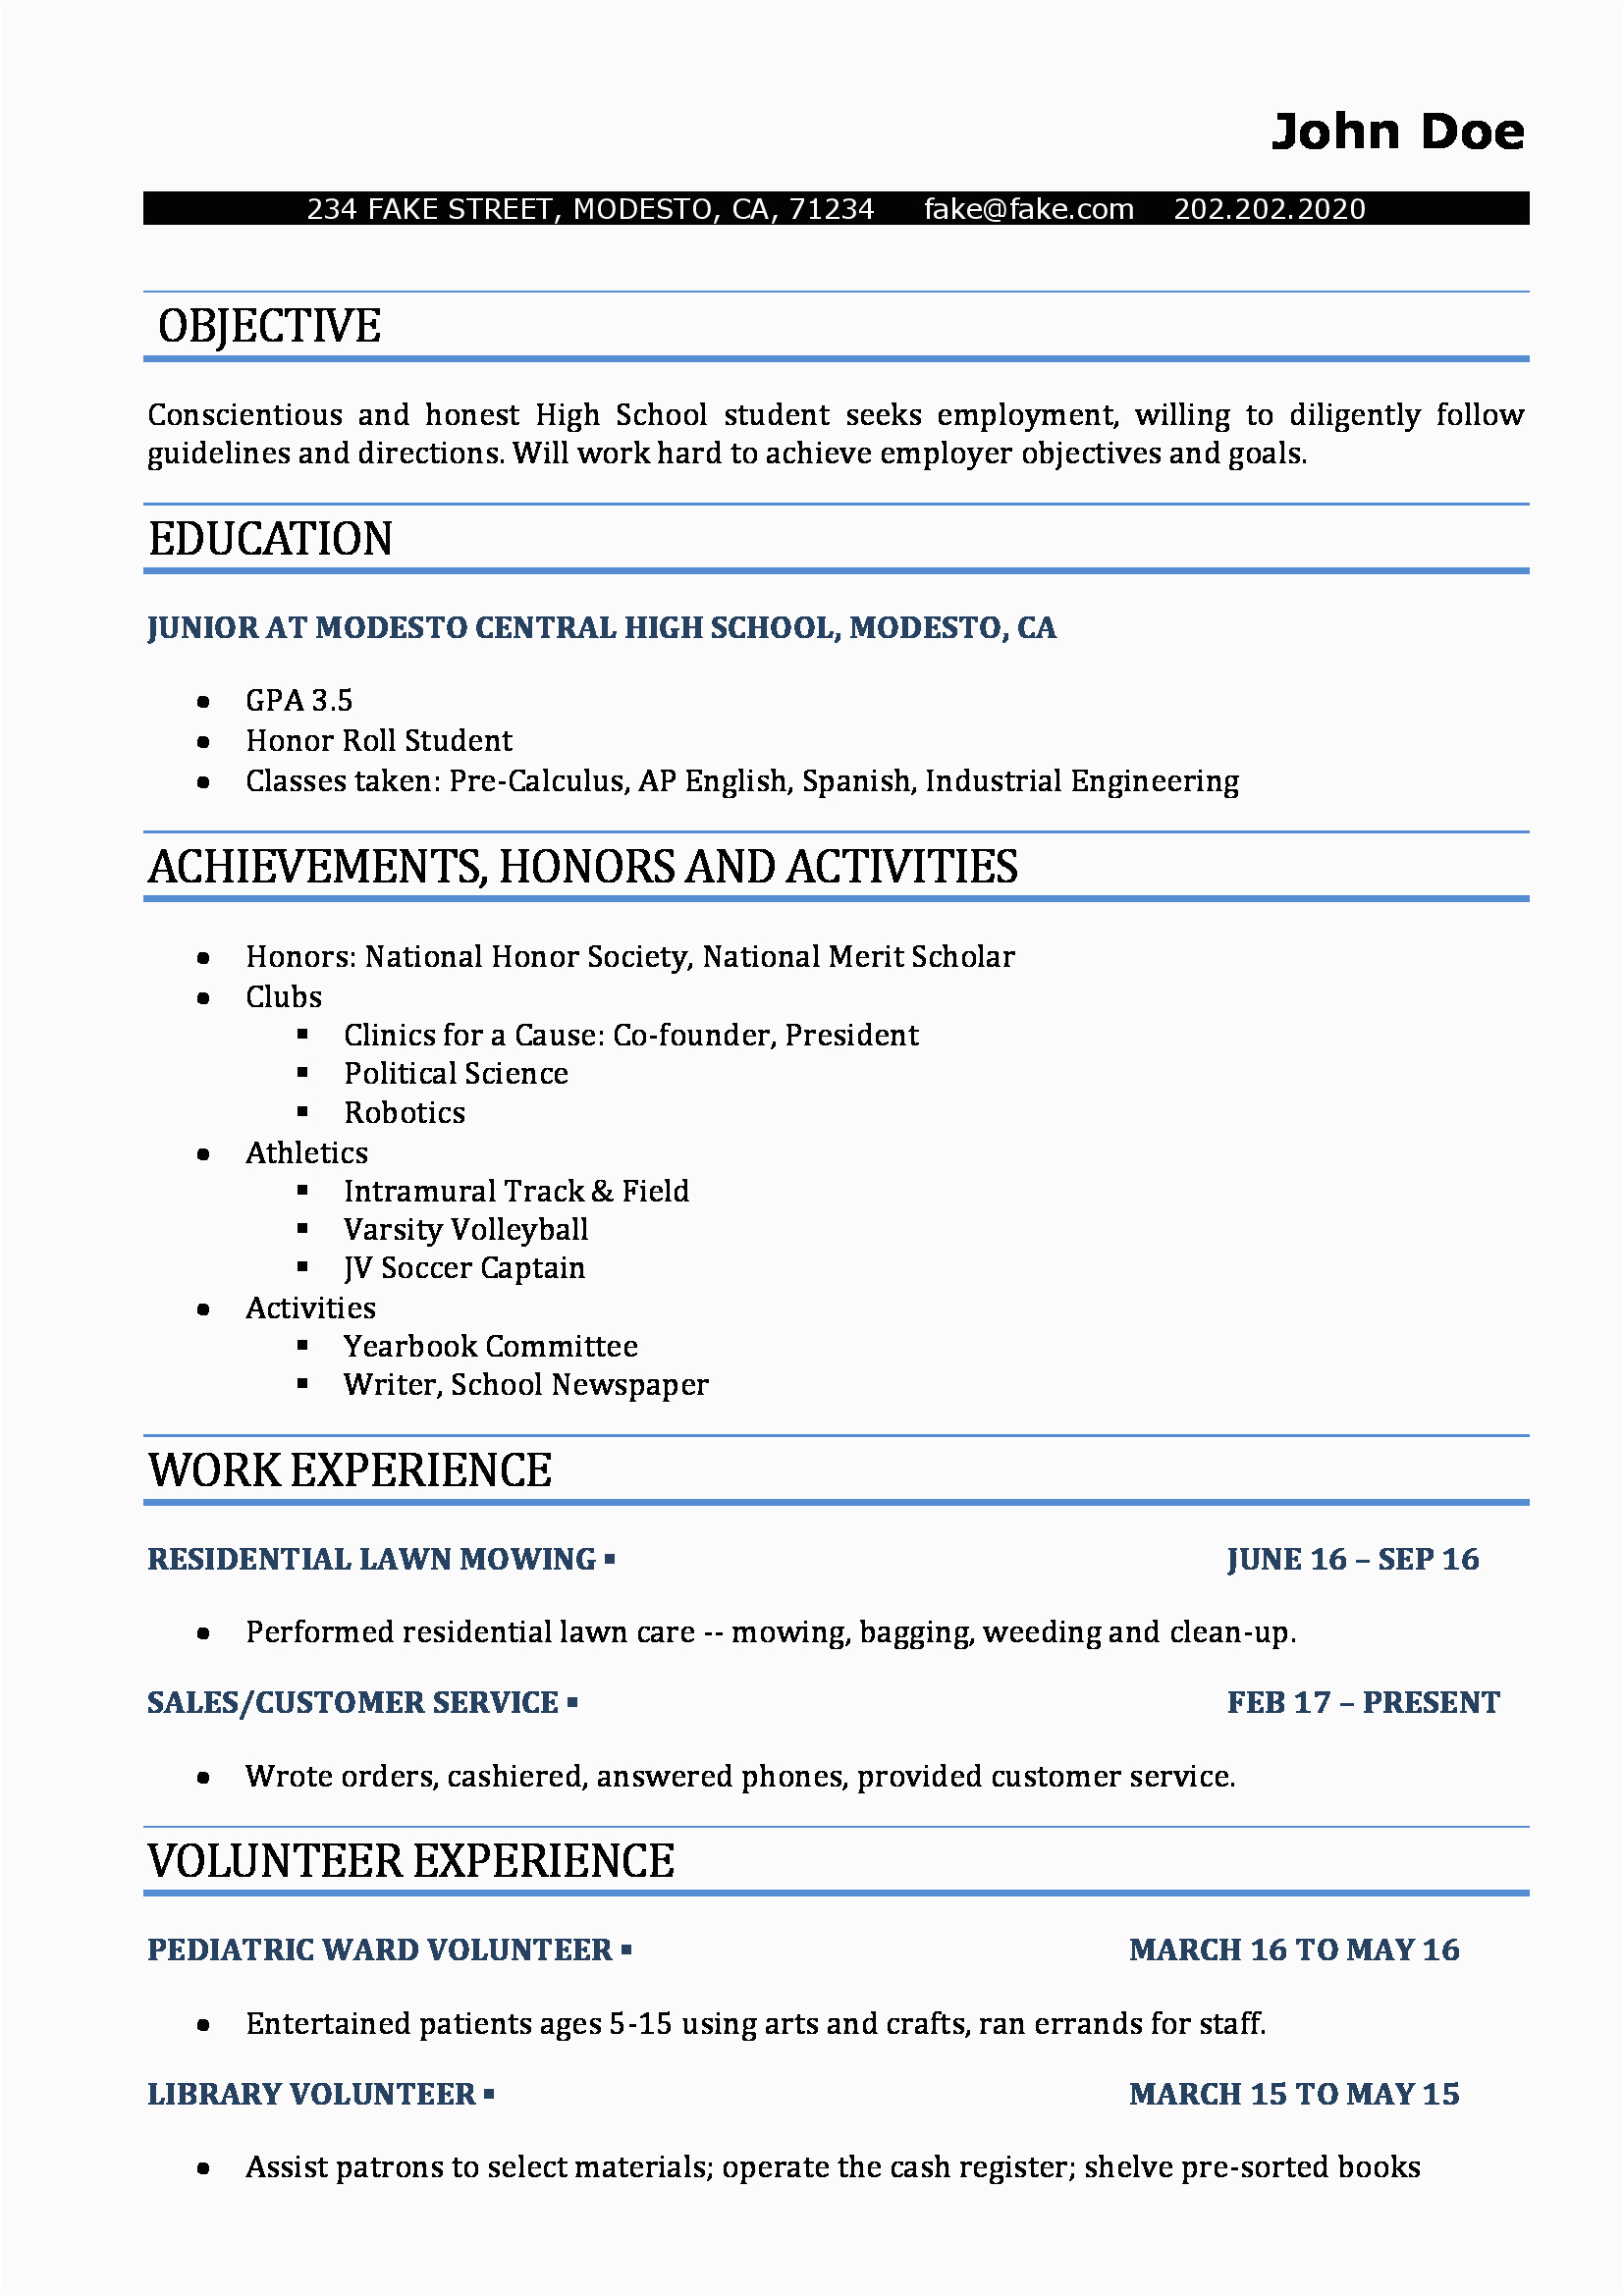 Resume Writing Template for High School Students High School Resume Resume Templates for High School